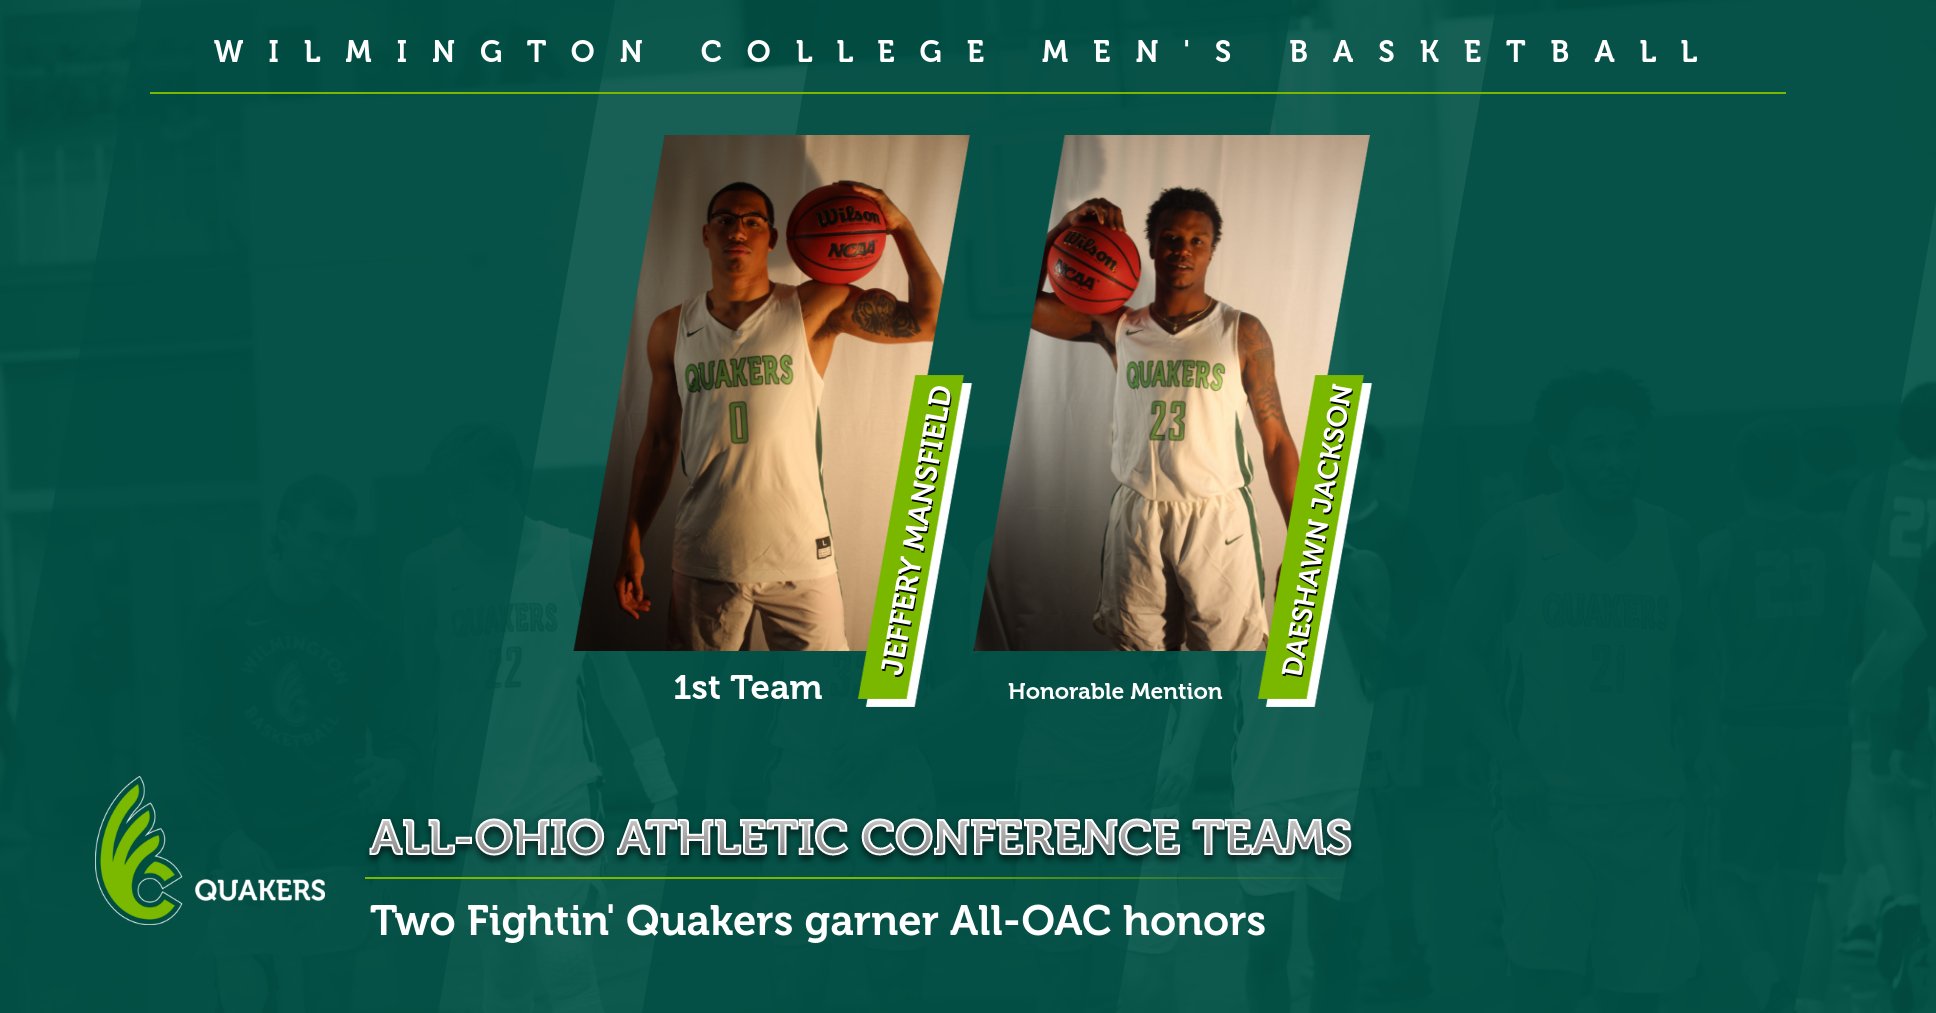 Mansfield and Jackson Earn All-OAC Honors